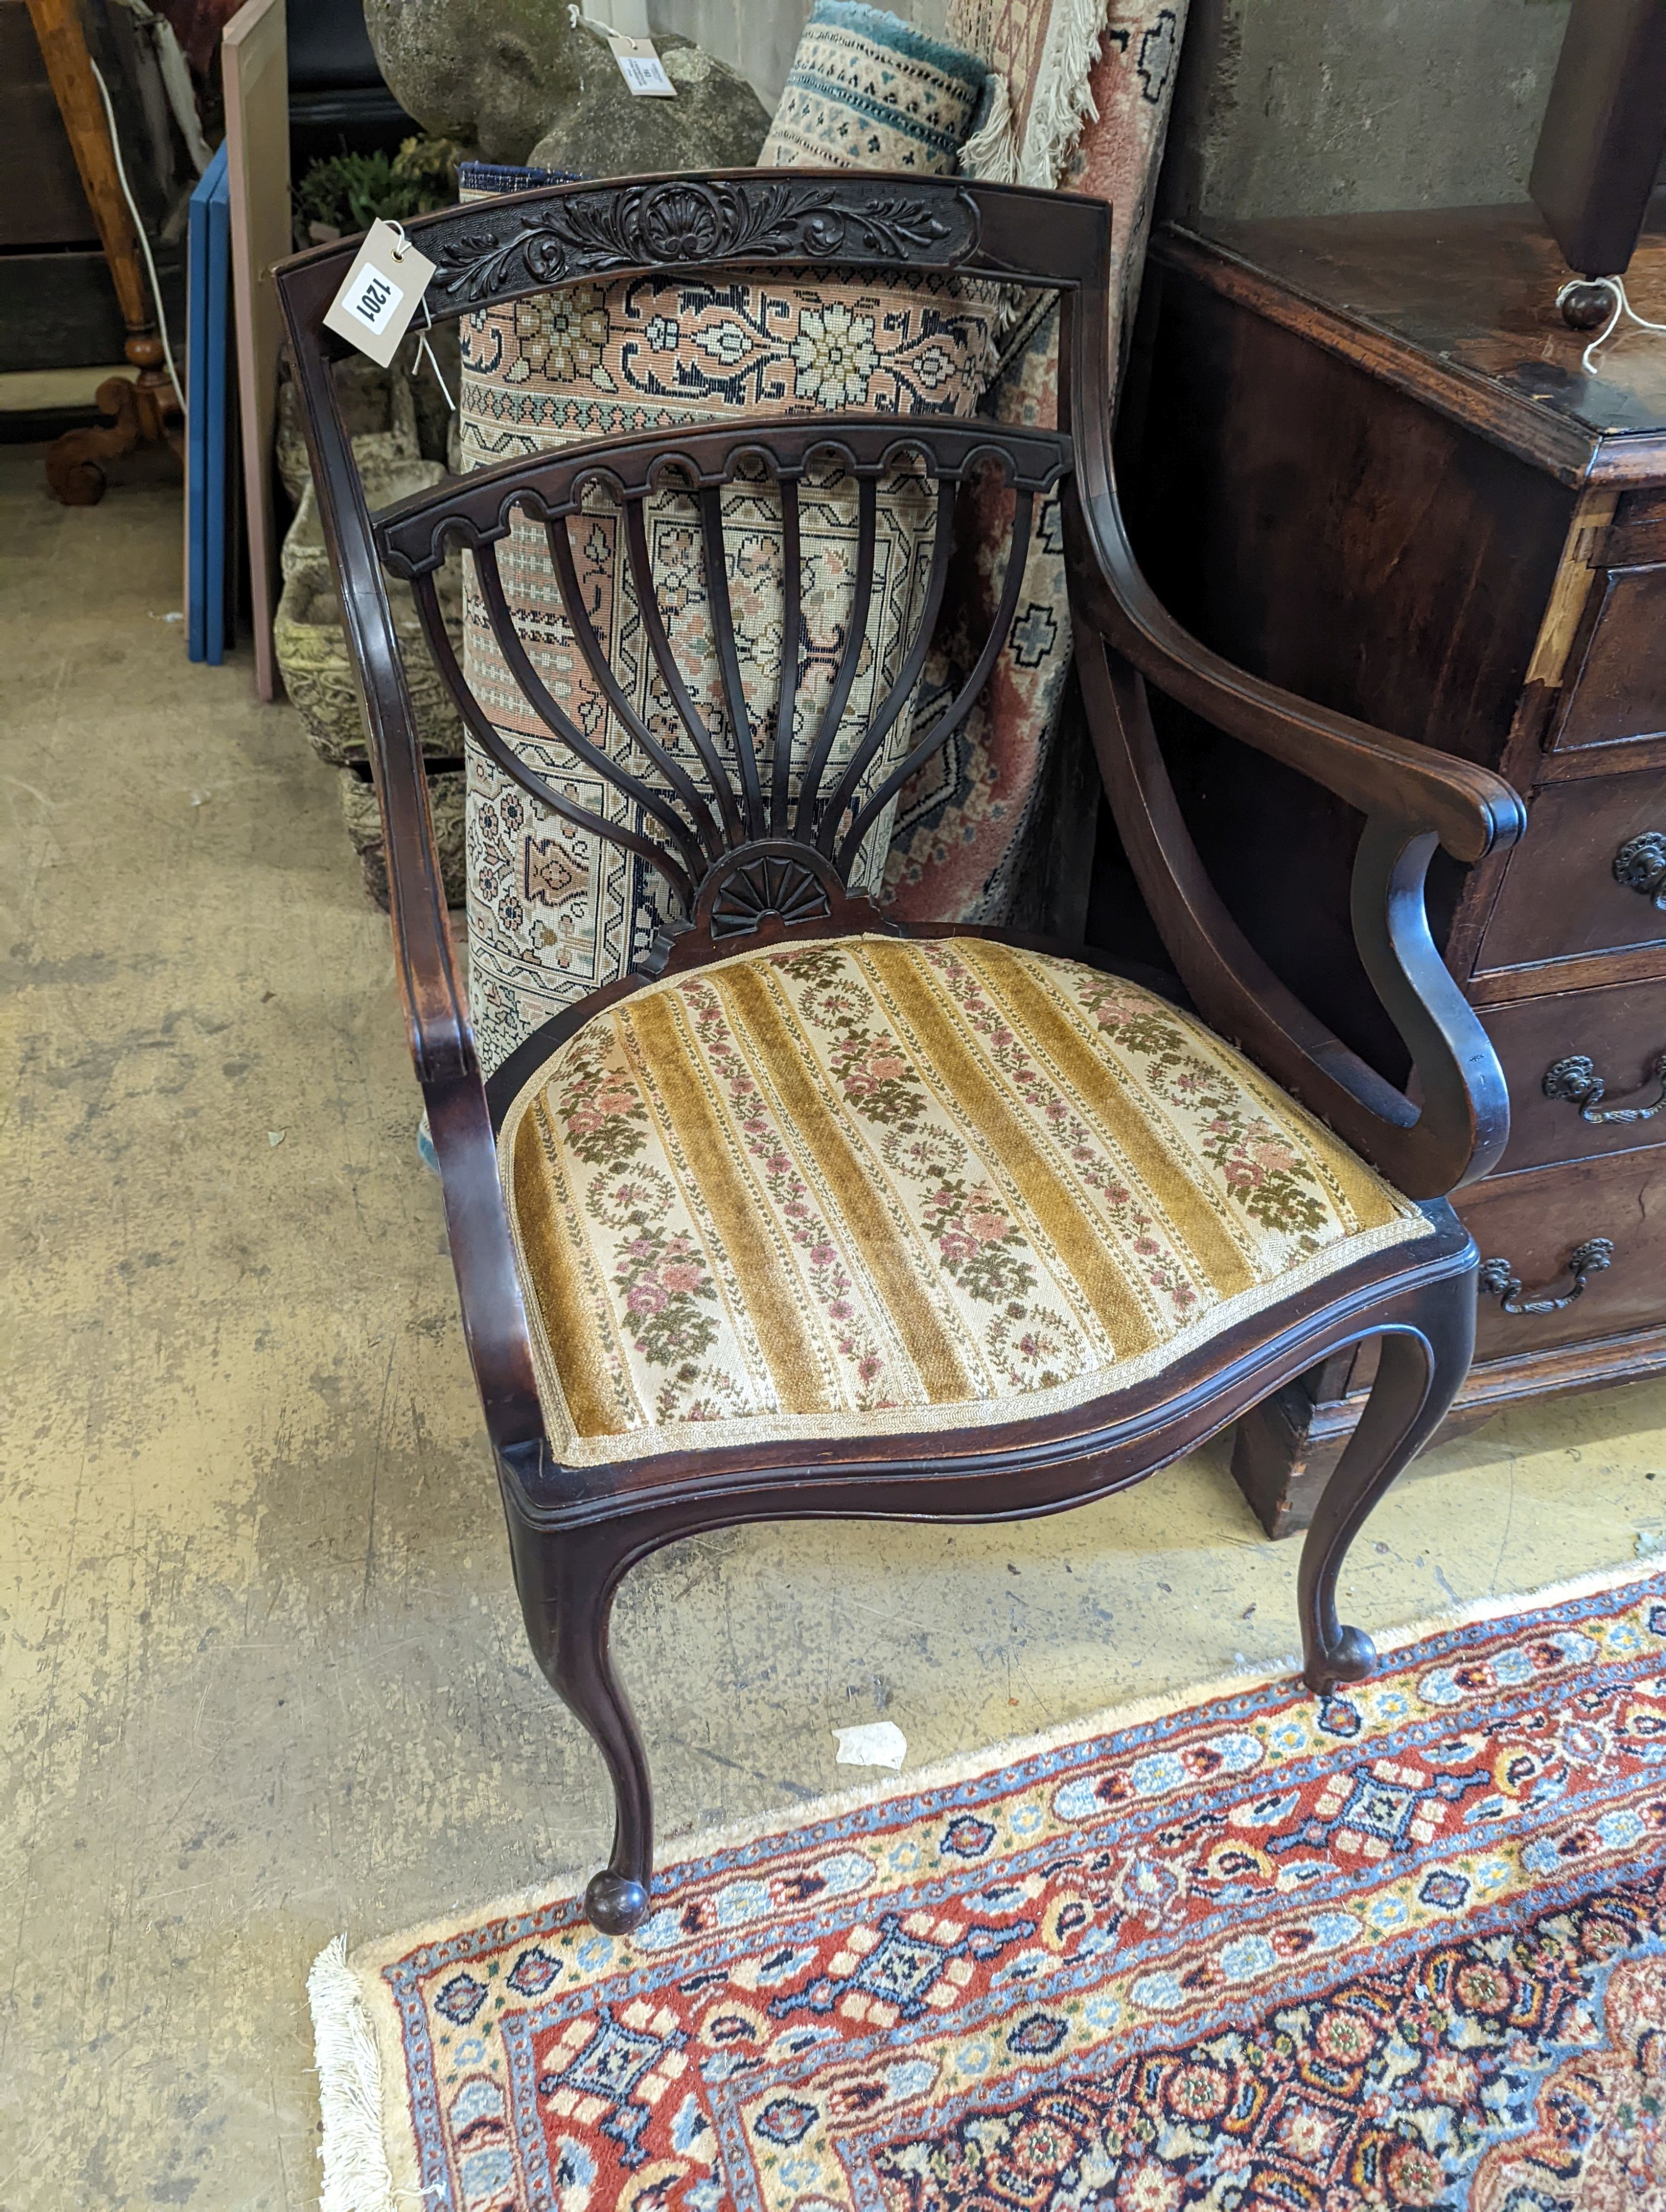 A late Victorian carved mahogany elbow chair